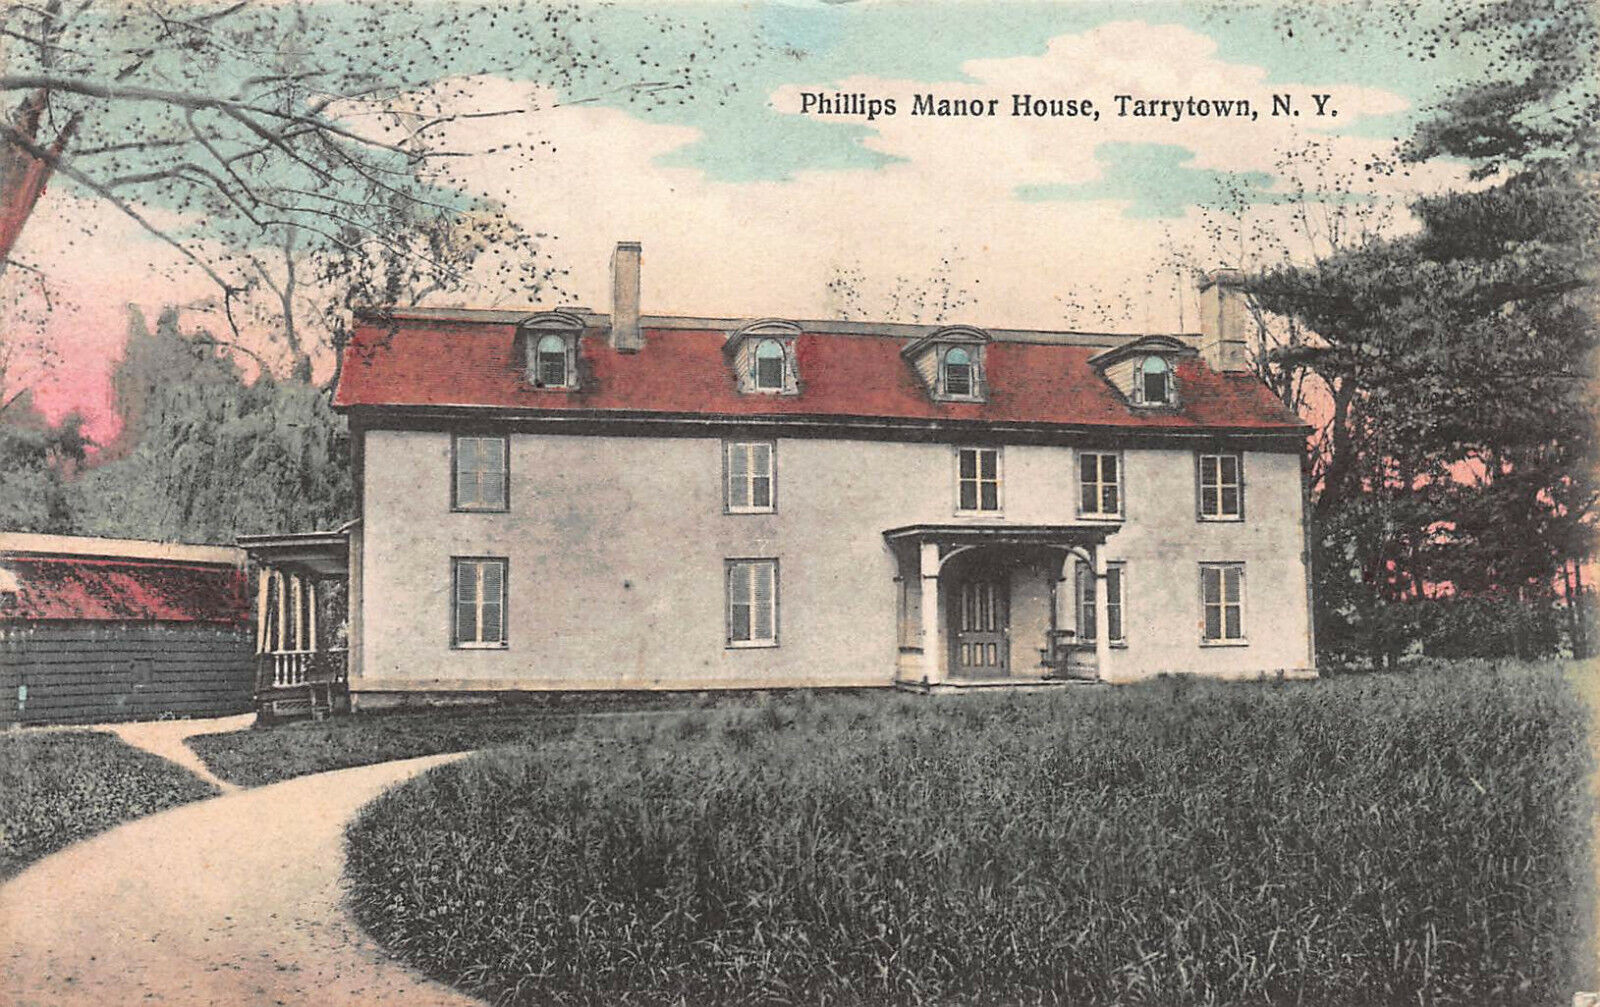 Phillips Manor House, Tarrytown, N.Y., Hand Colored Postcard, Used in 1910